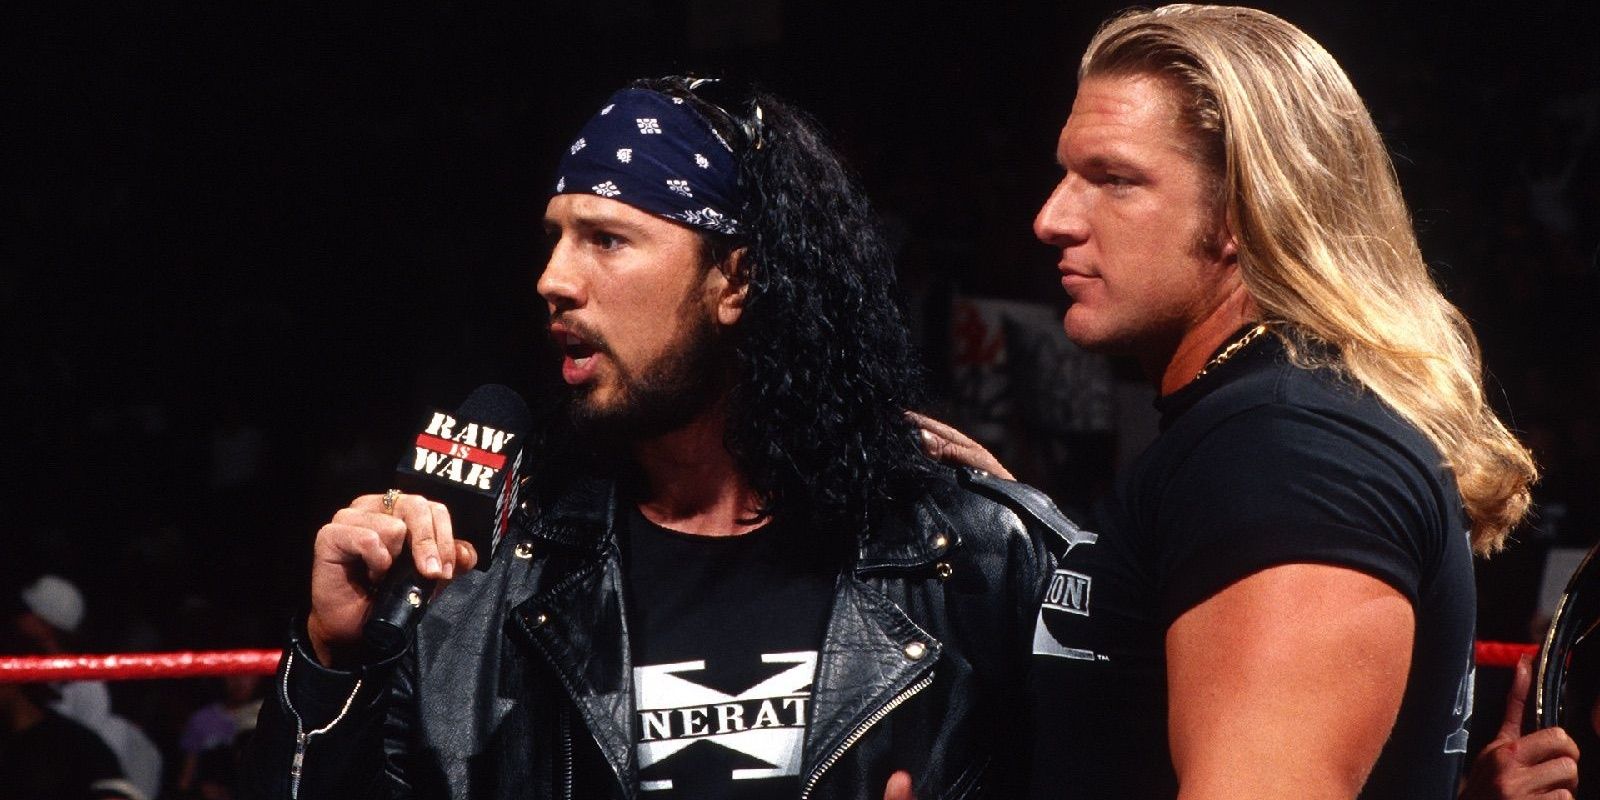 Triple H becomes the leader of DX